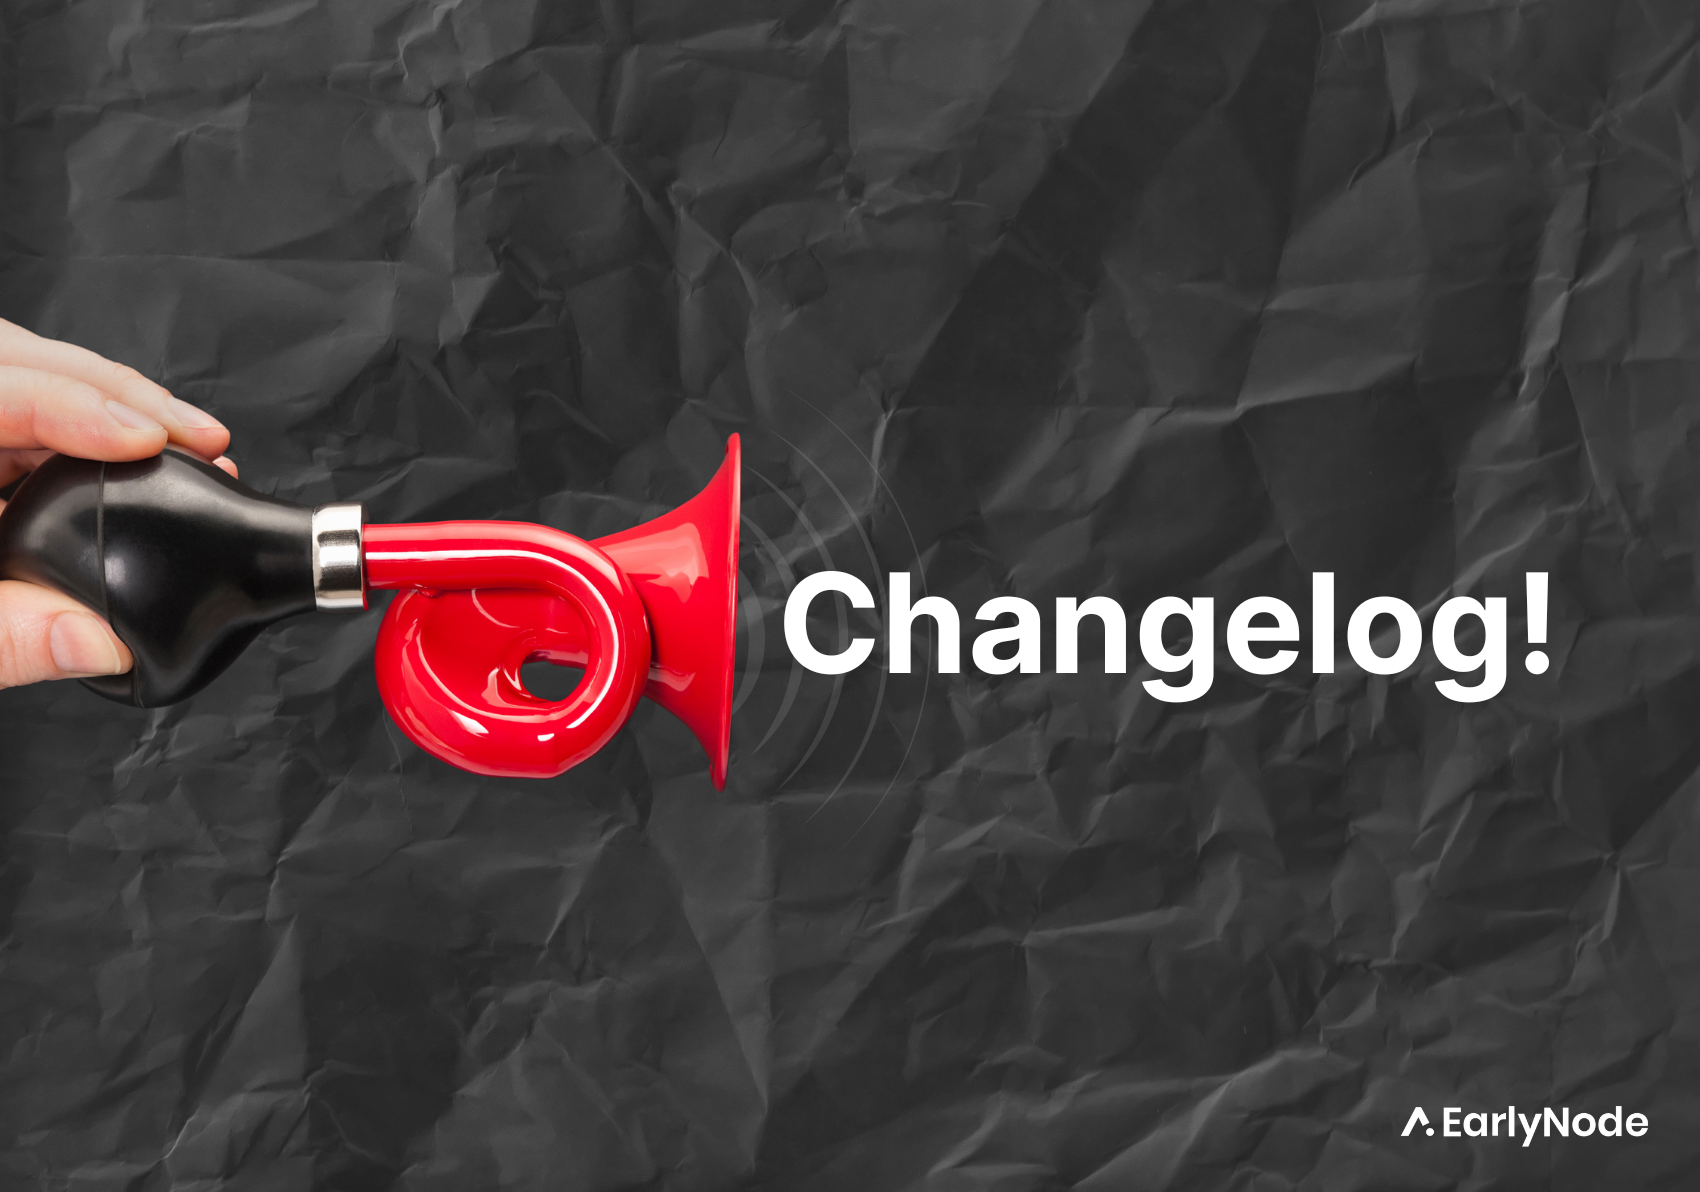 How to Use a Changelog to Announce New Features